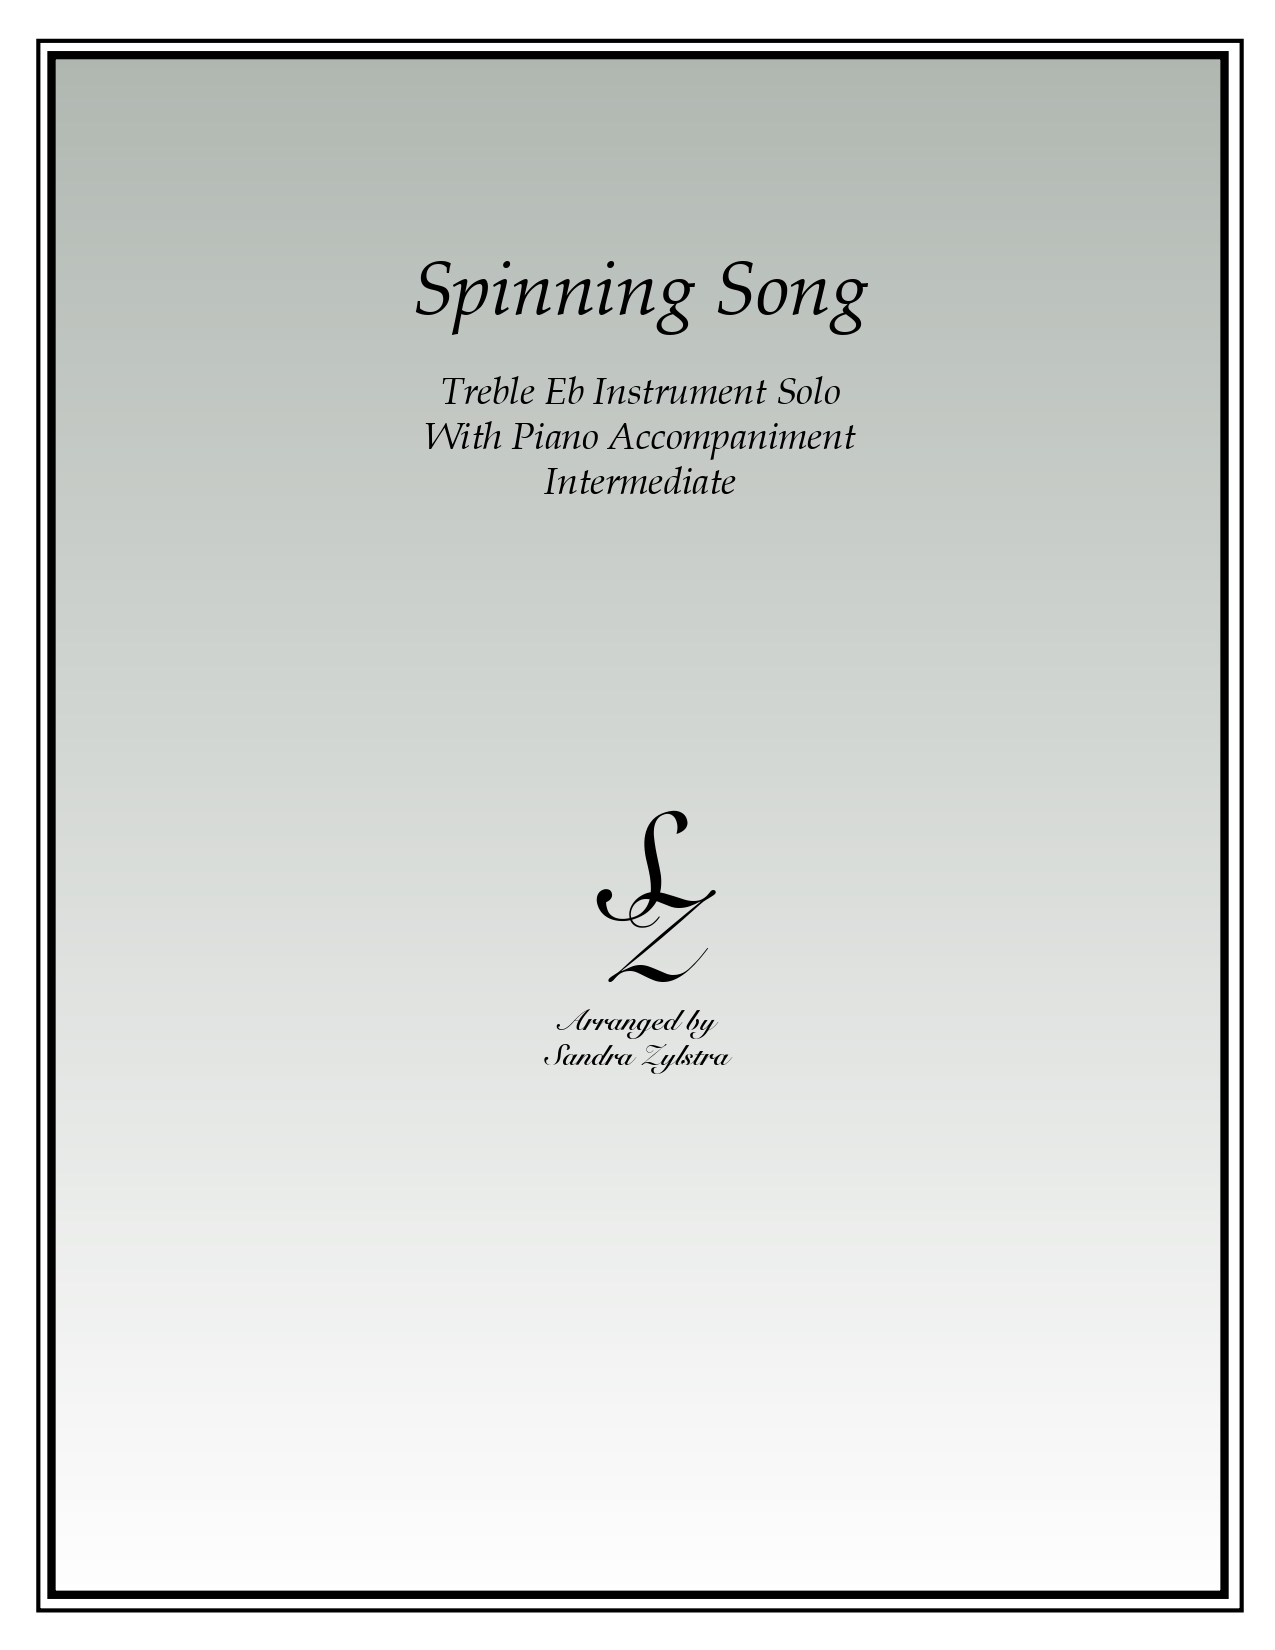 Spinning Song Eb instrument solo part cover 1 page 00011